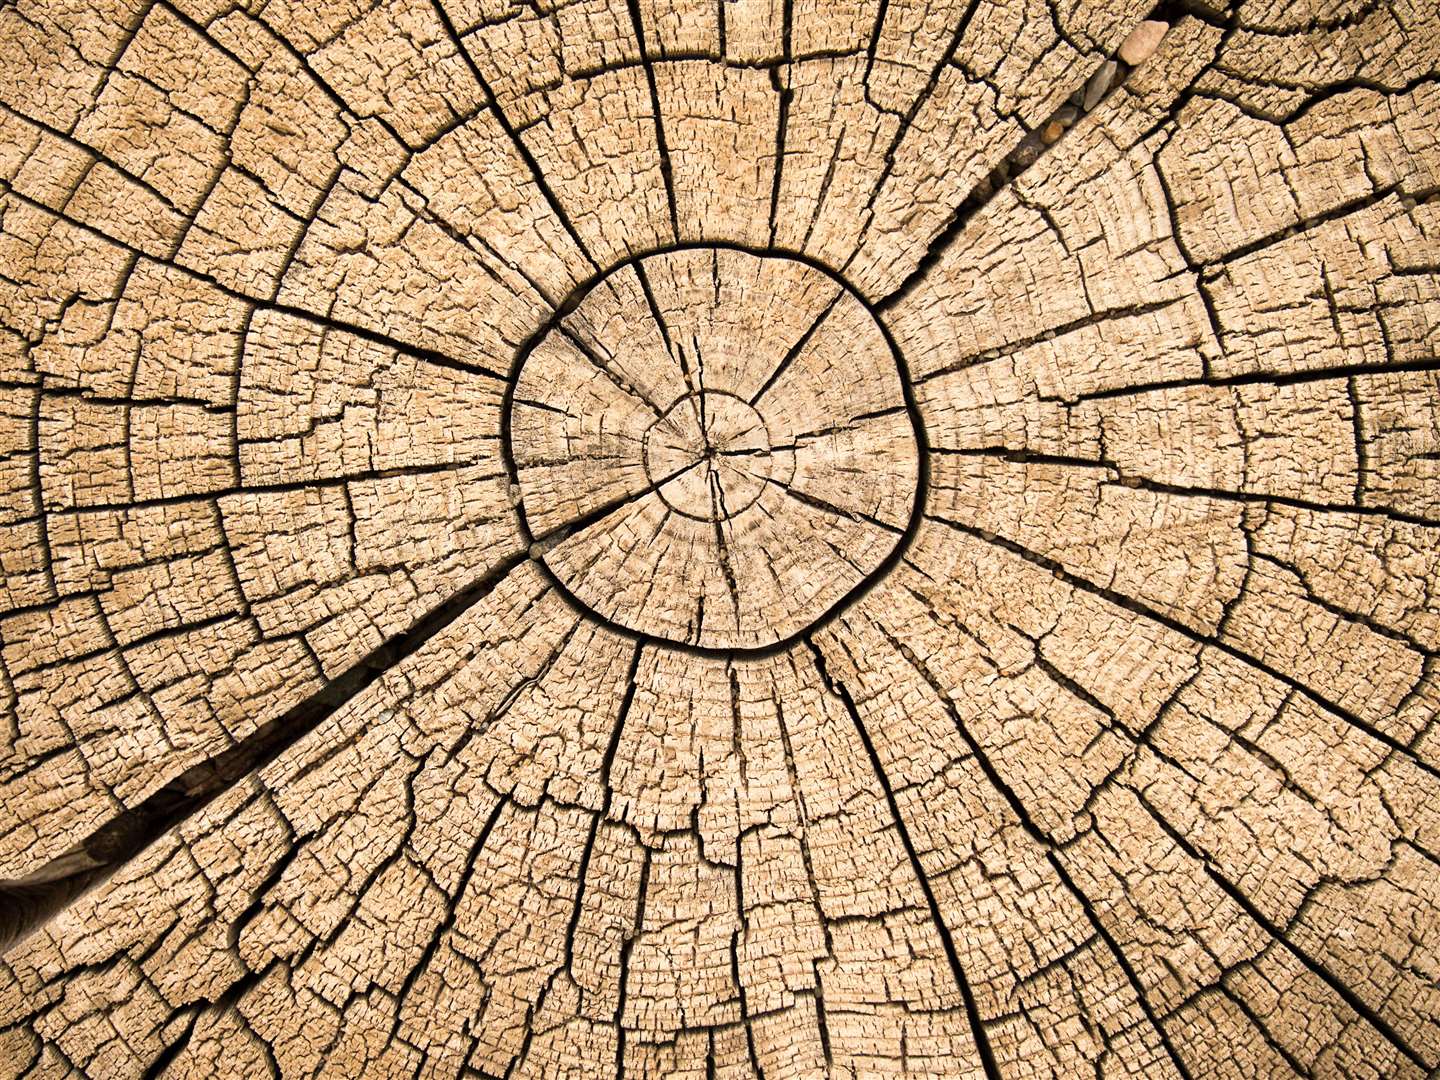 Ancient tree rings provided clues to the celestial event (Alamy/PA)